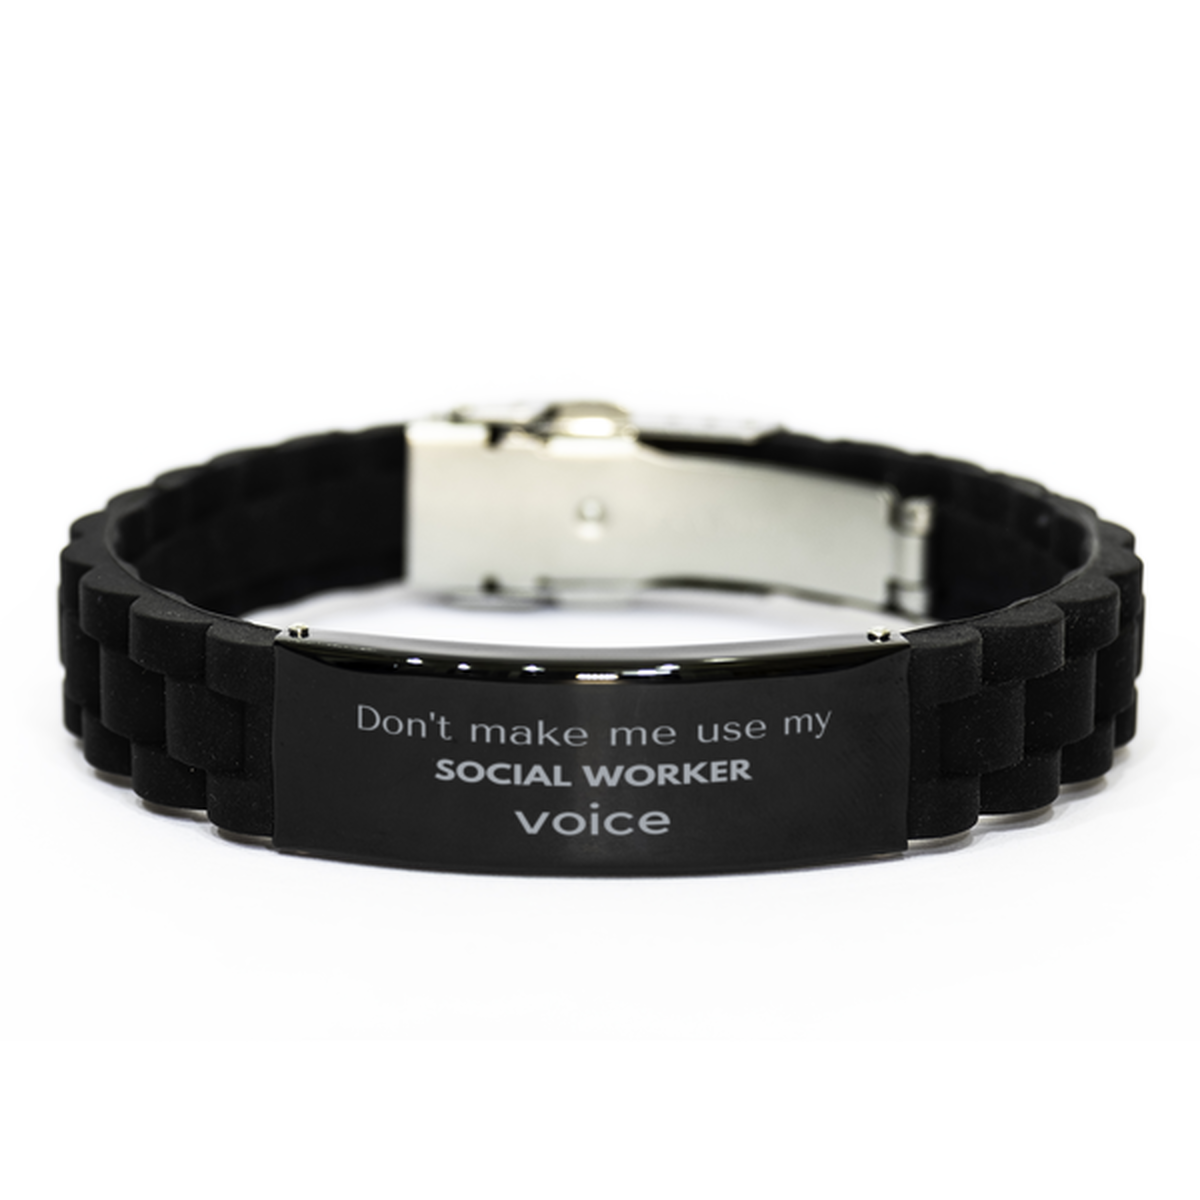 Don't make me use my Social Worker voice, Sarcasm Social Worker Gifts, Christmas Social Worker Black Glidelock Clasp Bracelet Birthday Unique Gifts For Social Worker Coworkers, Men, Women, Colleague, Friends